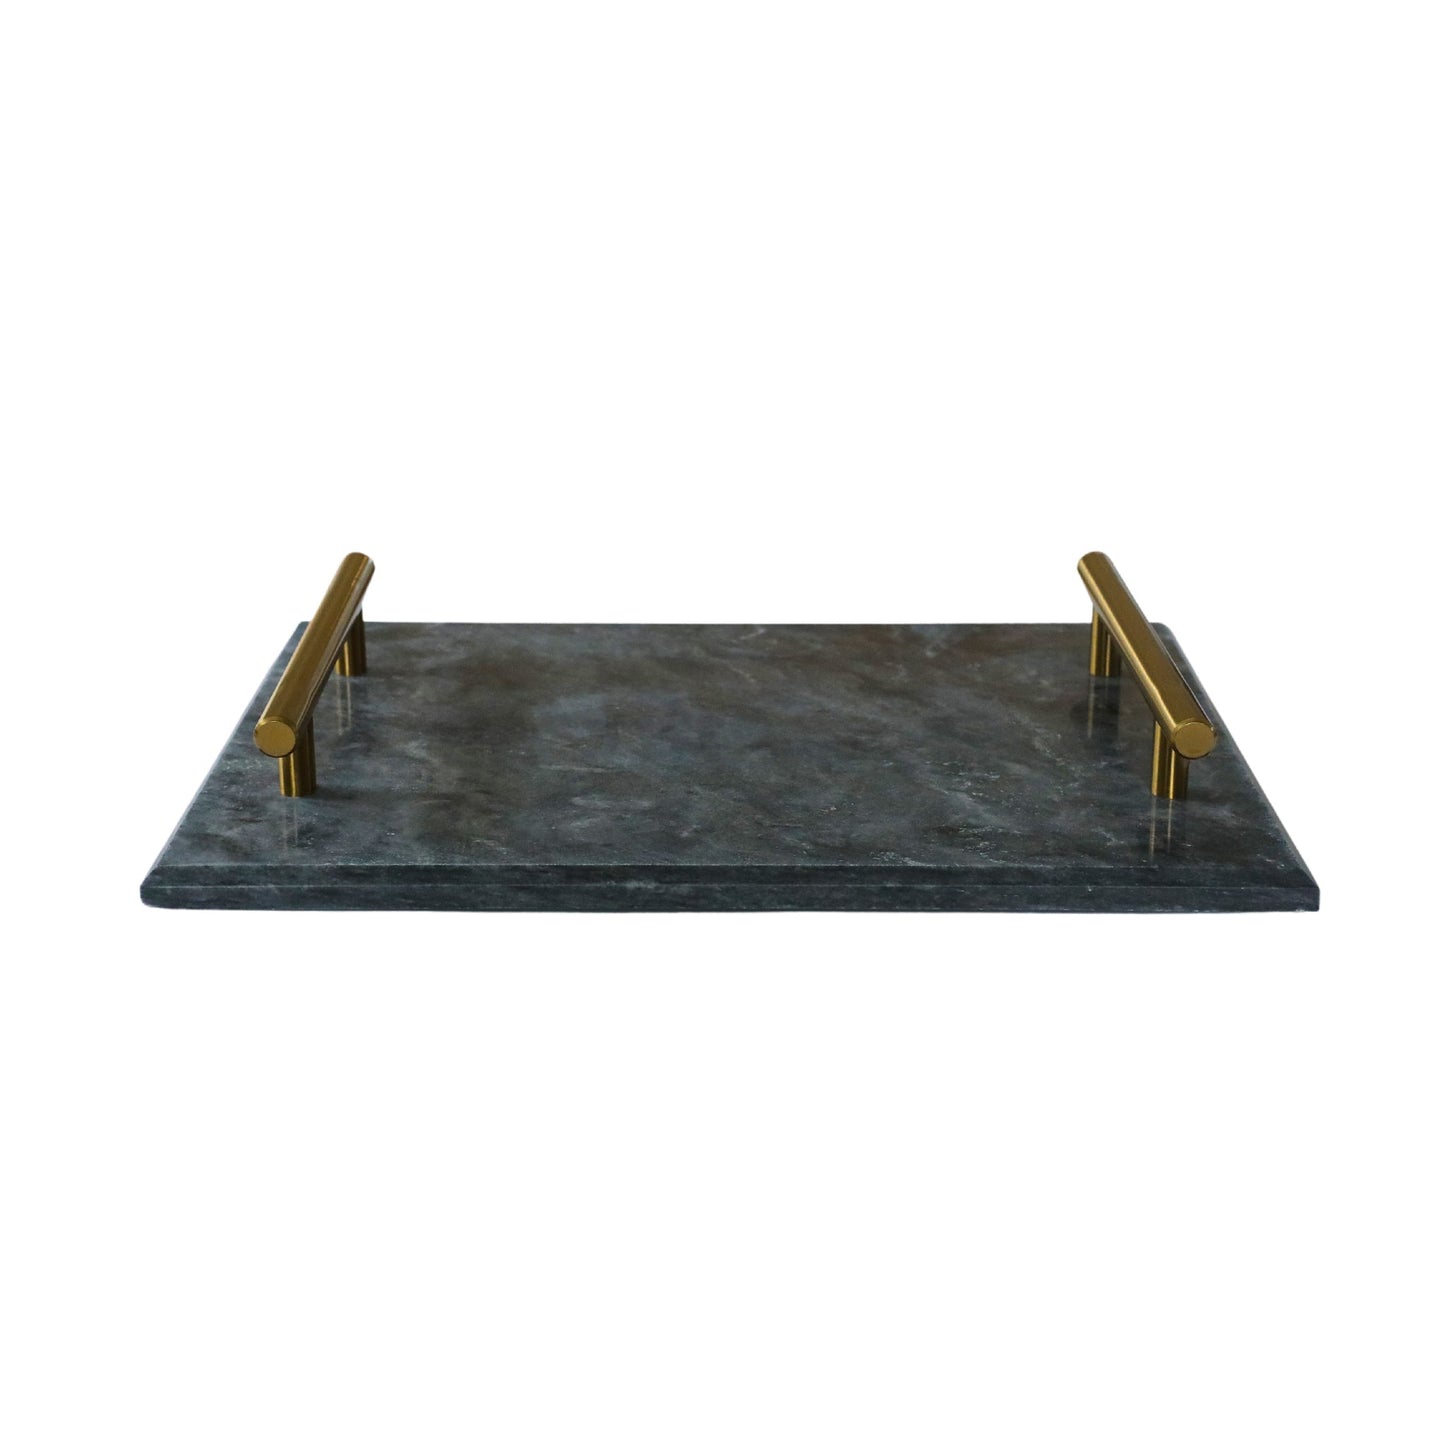 Black Marble Board with Gold Handles by Creative Gifts